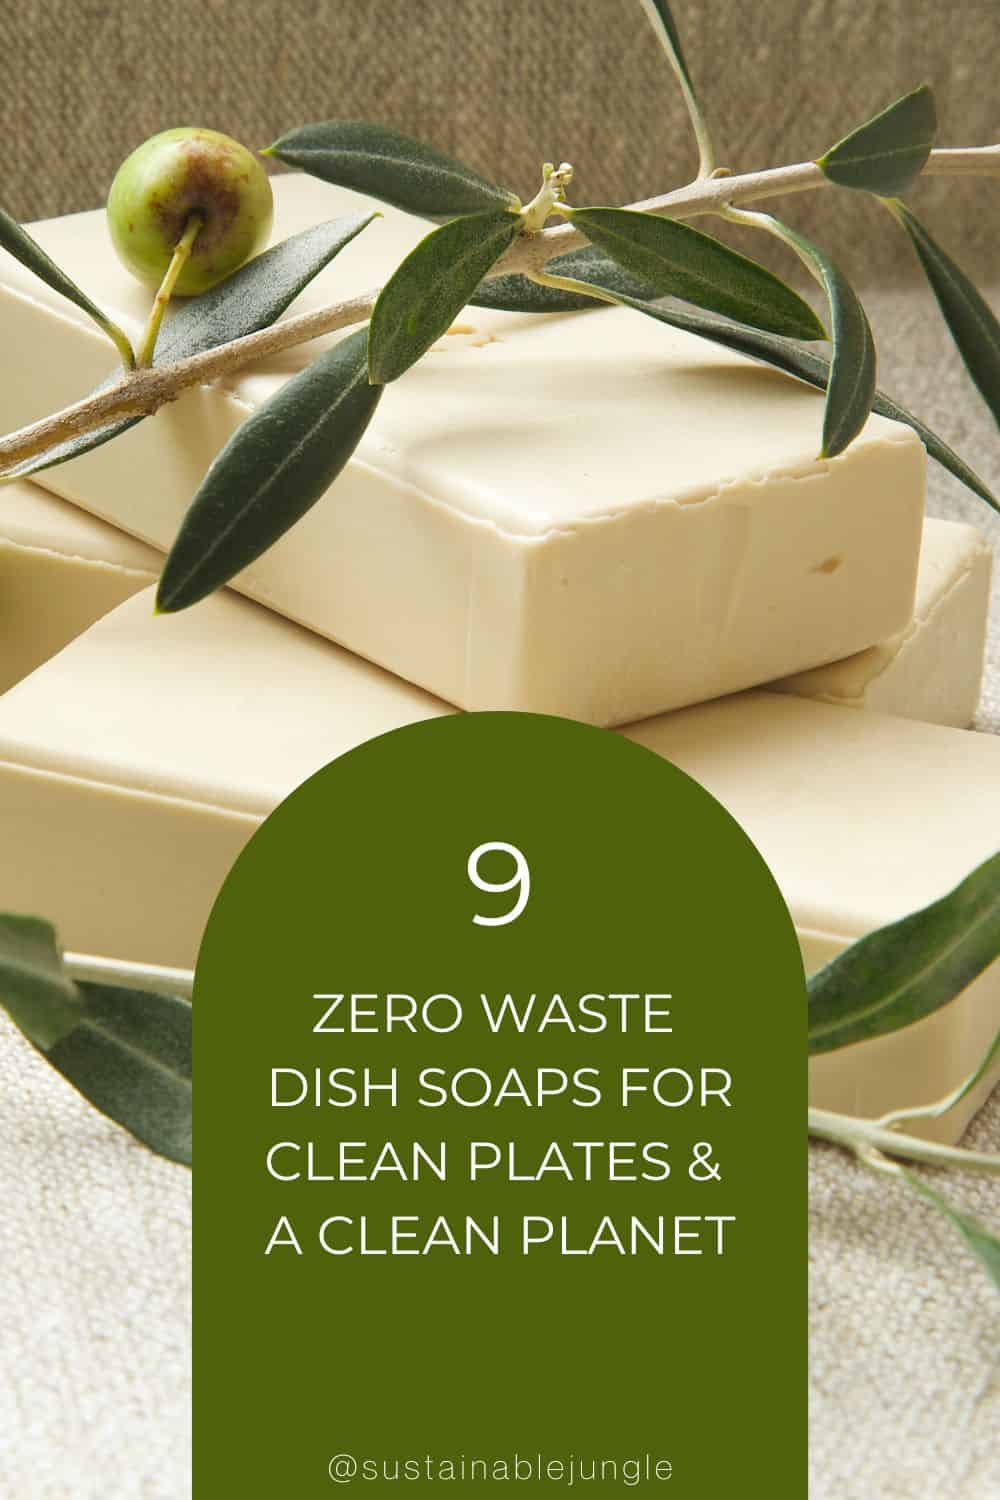 9 Zero Waste Dish Soaps For Clean Plates & A Clean Planet Image by tolikoffphotography #zerowastedishsoap #bestzerowastedishsoap #zerowastedishdetergent #ecofriendlydishsoap #dishsoapecofriendly # ecodishsoap #sustainablejungle